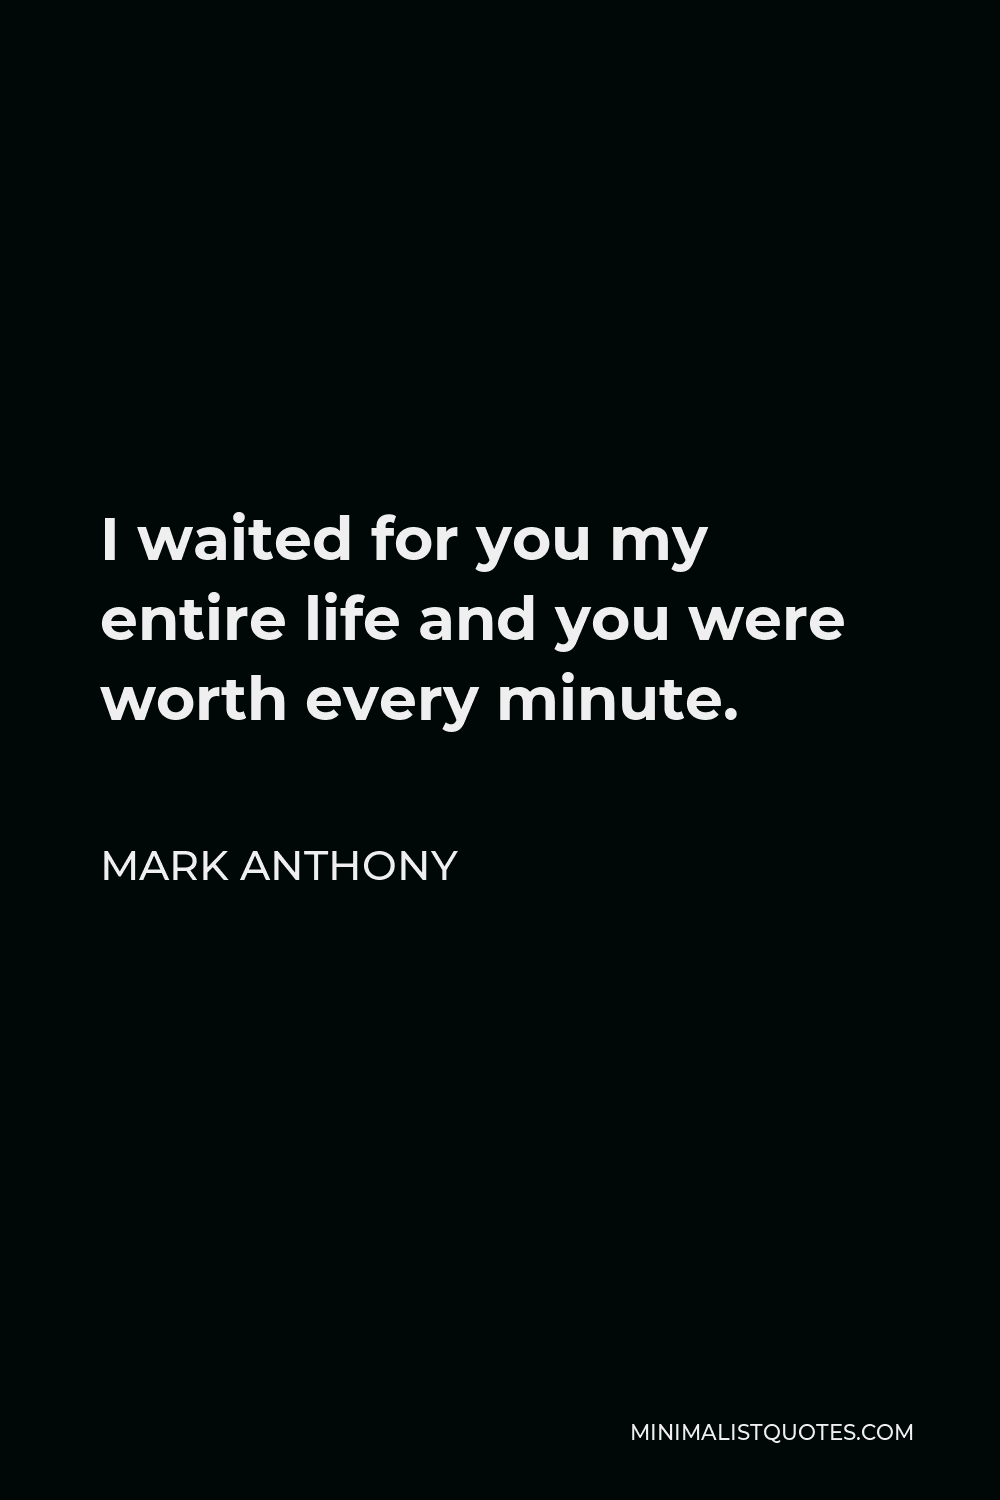 Mark Anthony Quote - I waited for you my entire life and you were worth every minute.